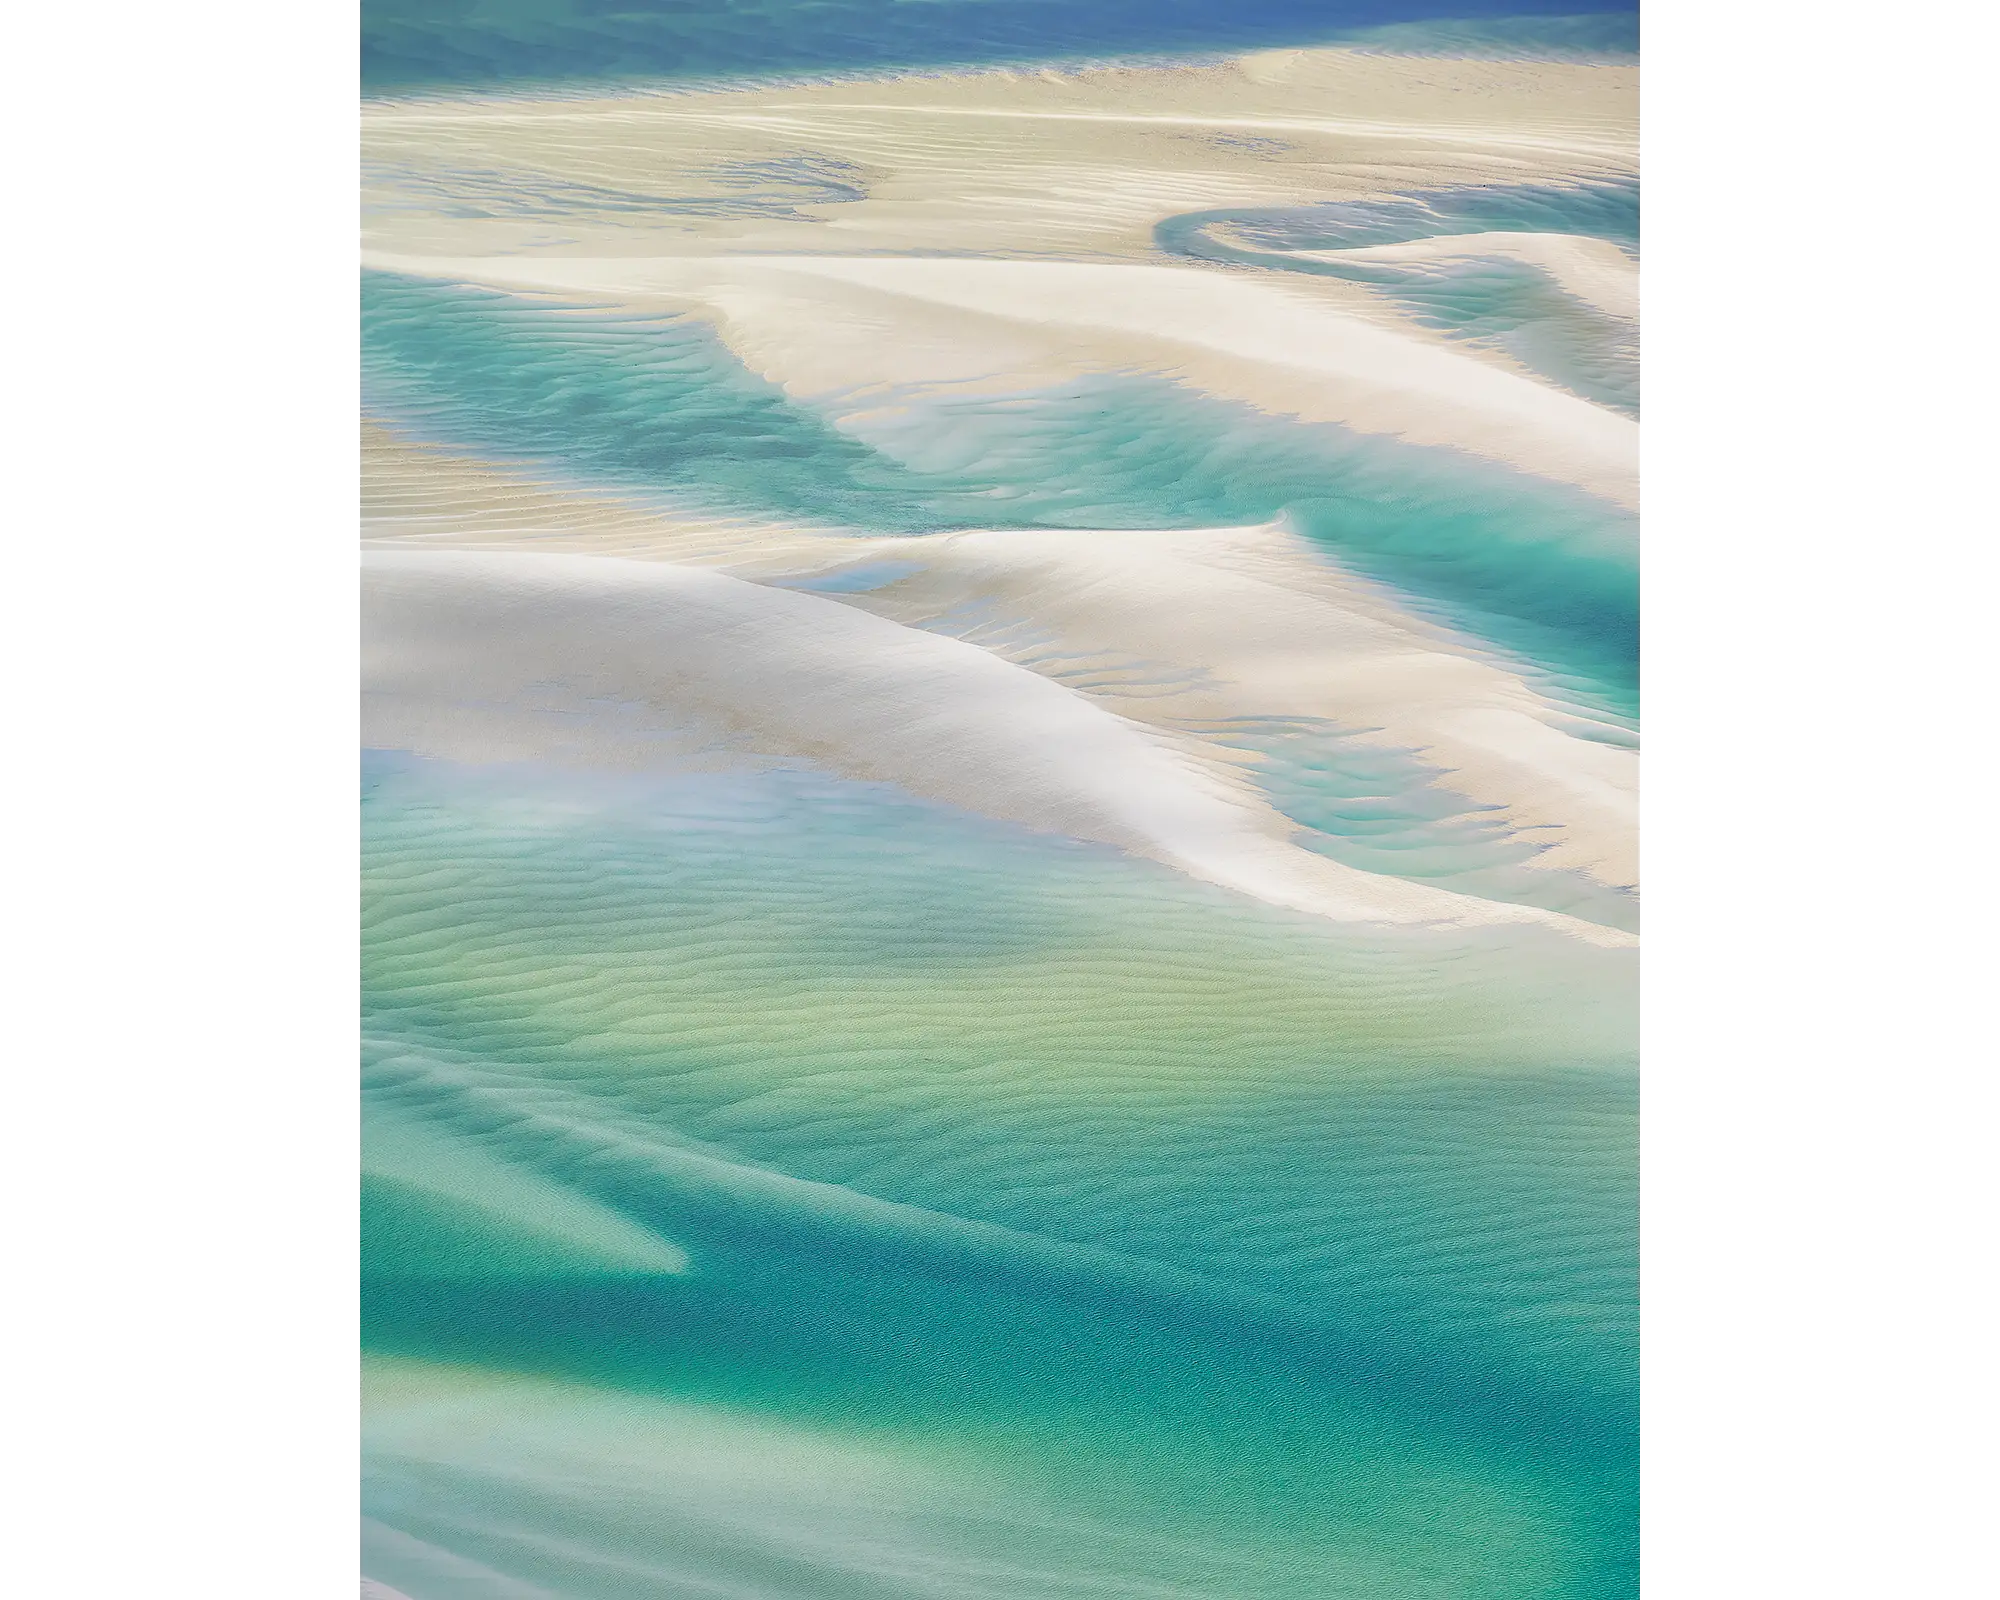 Whitsunday Colours - Tidal sands from above Whitsunday Island, Queensland, Australia.